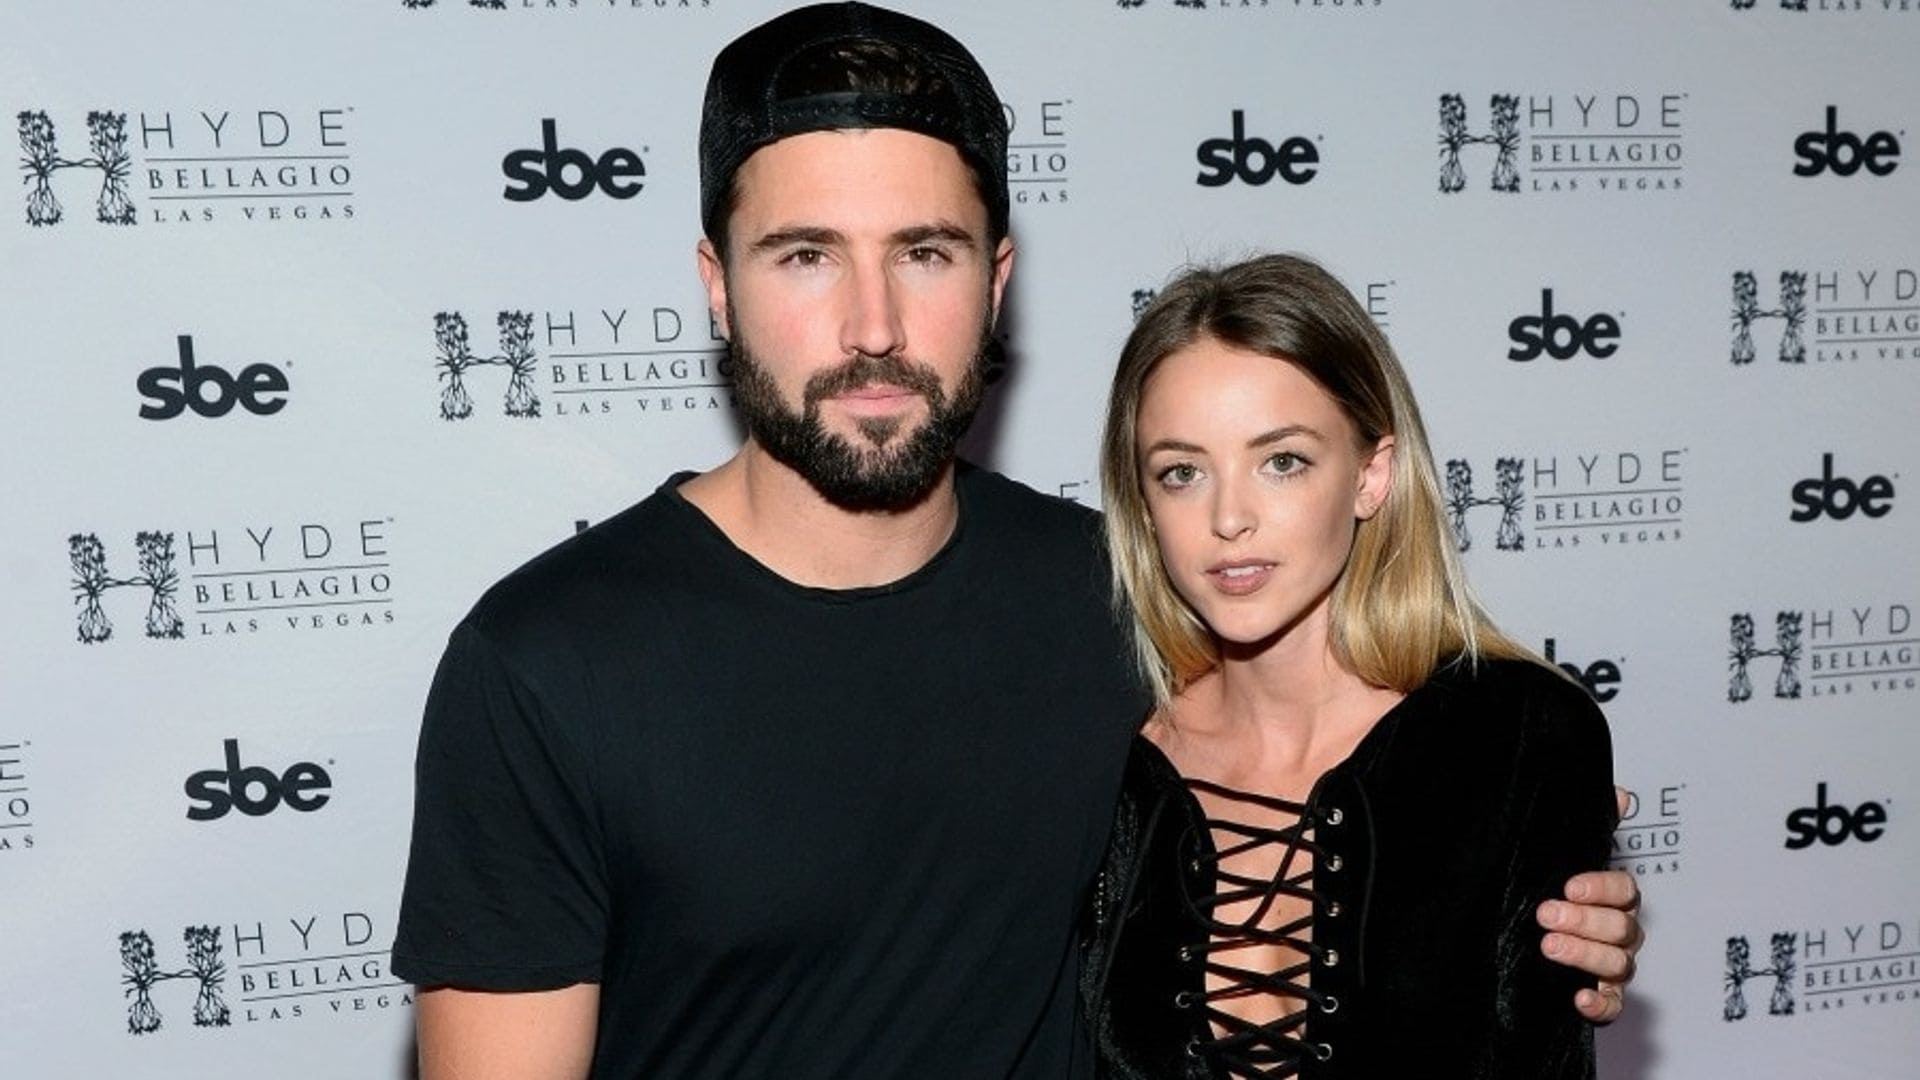 Brody called Kaitlynn his "lover" and "best friend."
<br>
Photo: Getty Images